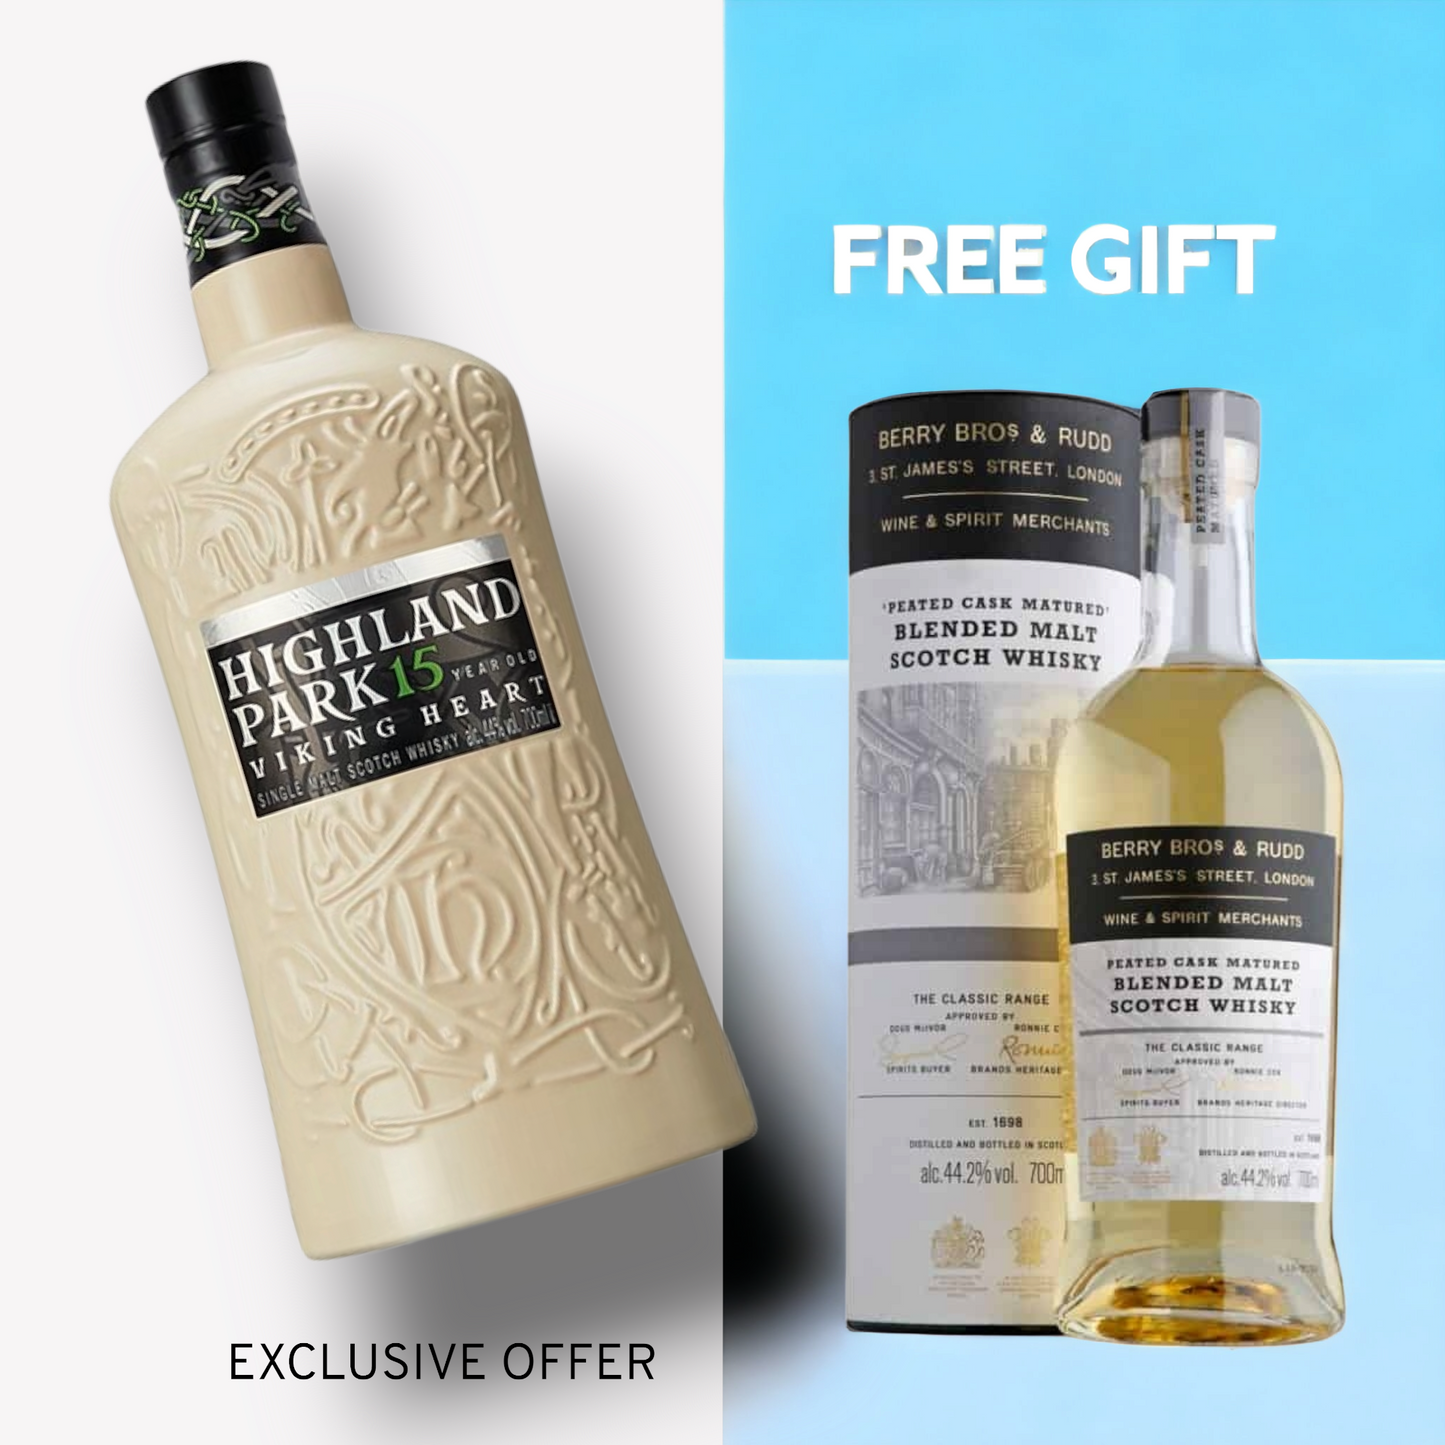 Buy Highland Park 15 年 Viking Heart 70cl ($1080) get a free bottle of BBR Classic Peated Cask 46% 70cl whisky Highland Park Whisky Bundle